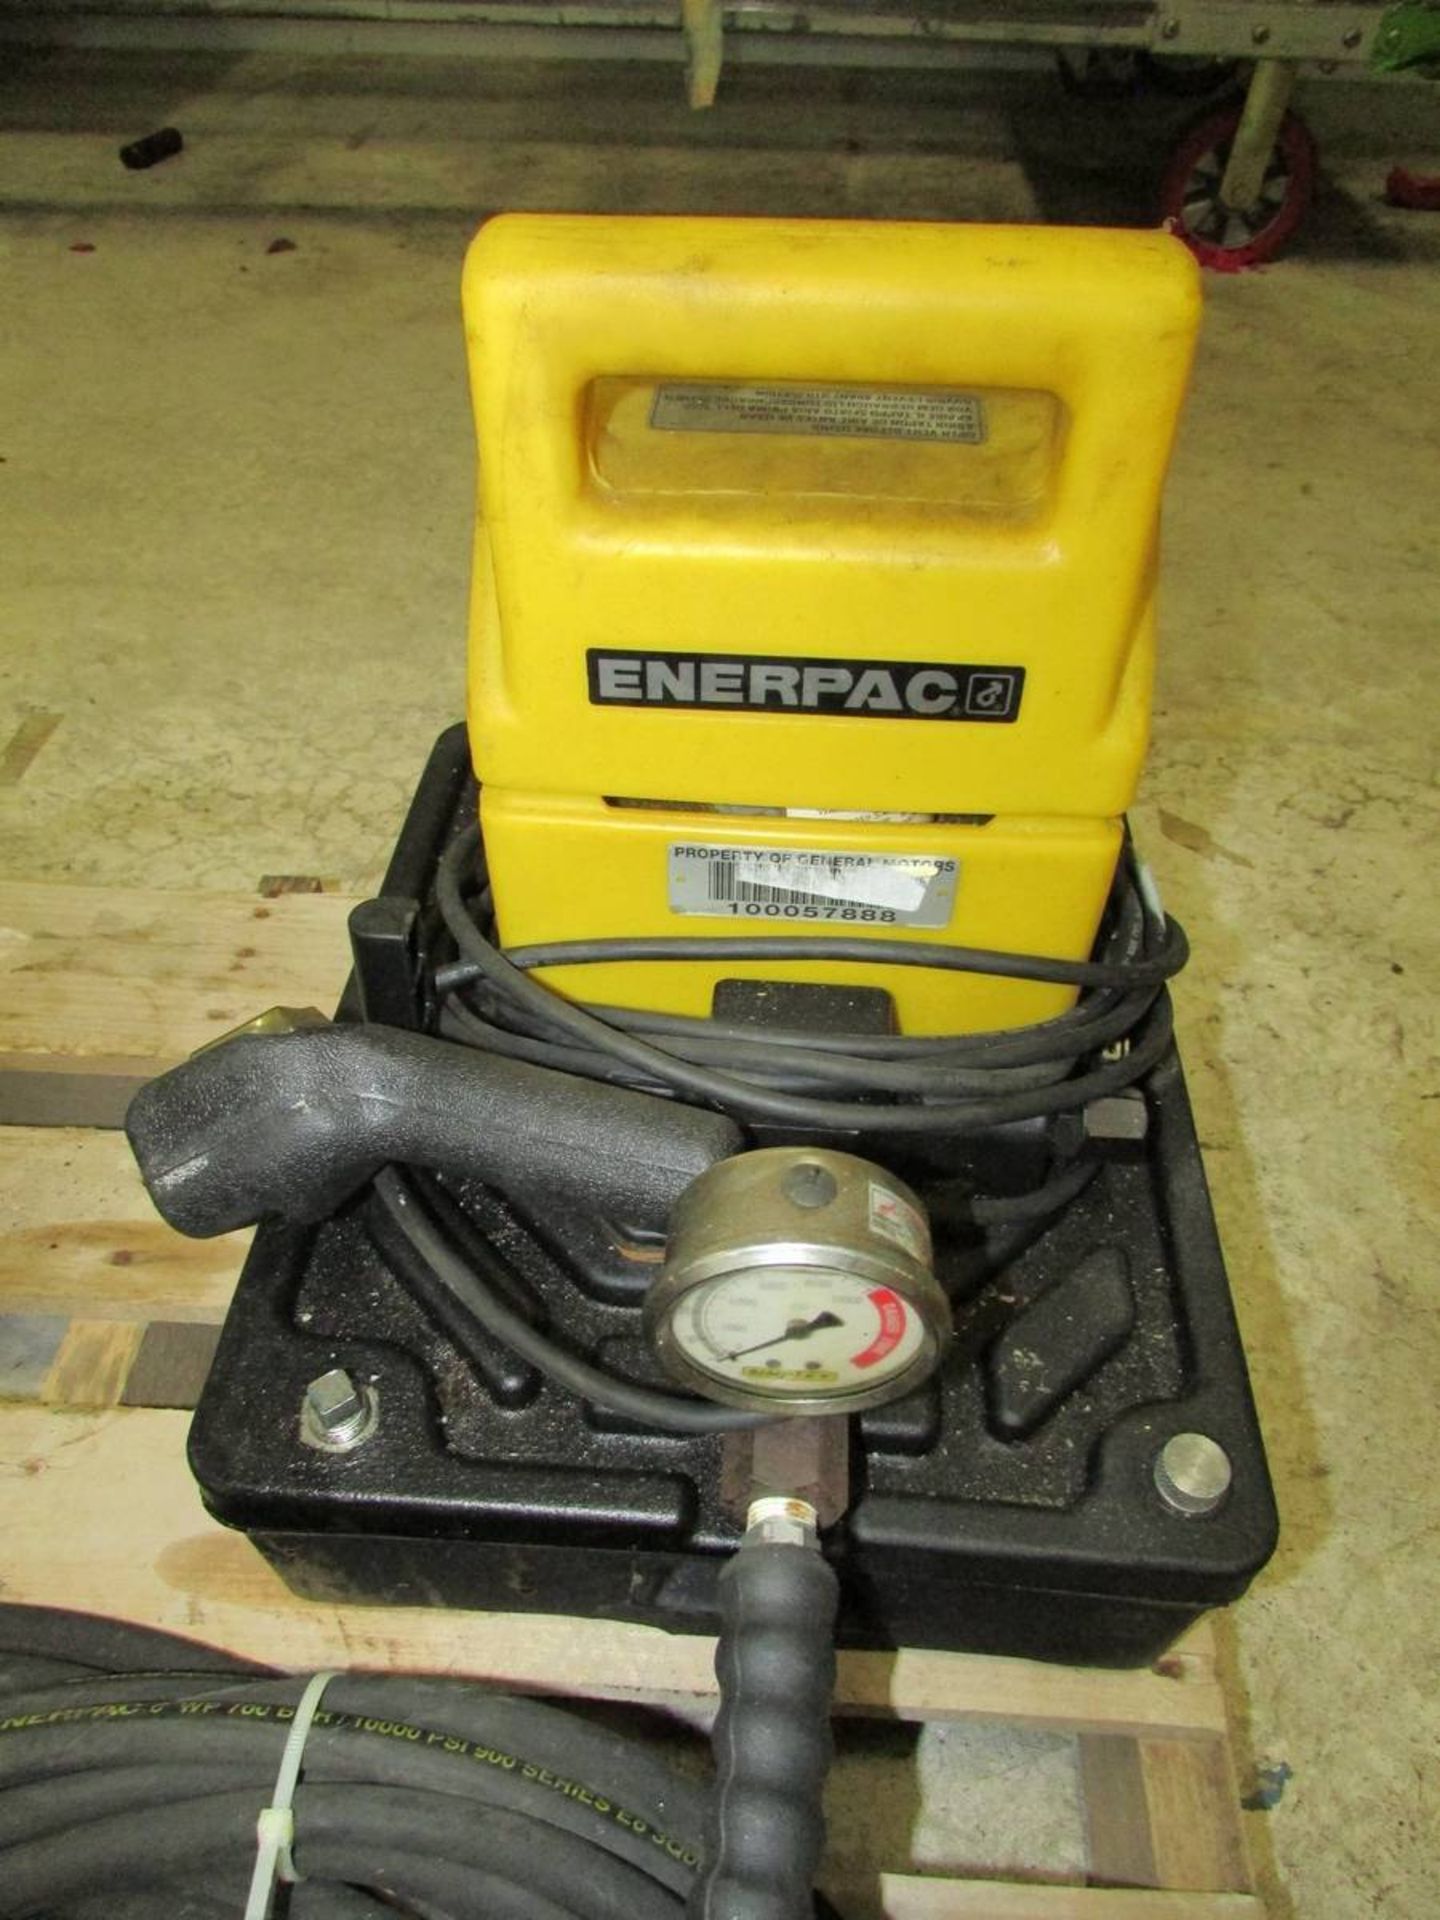 Enerpac PUJ12016 1/2 HP Electric Hydraulic Pump - Image 3 of 8